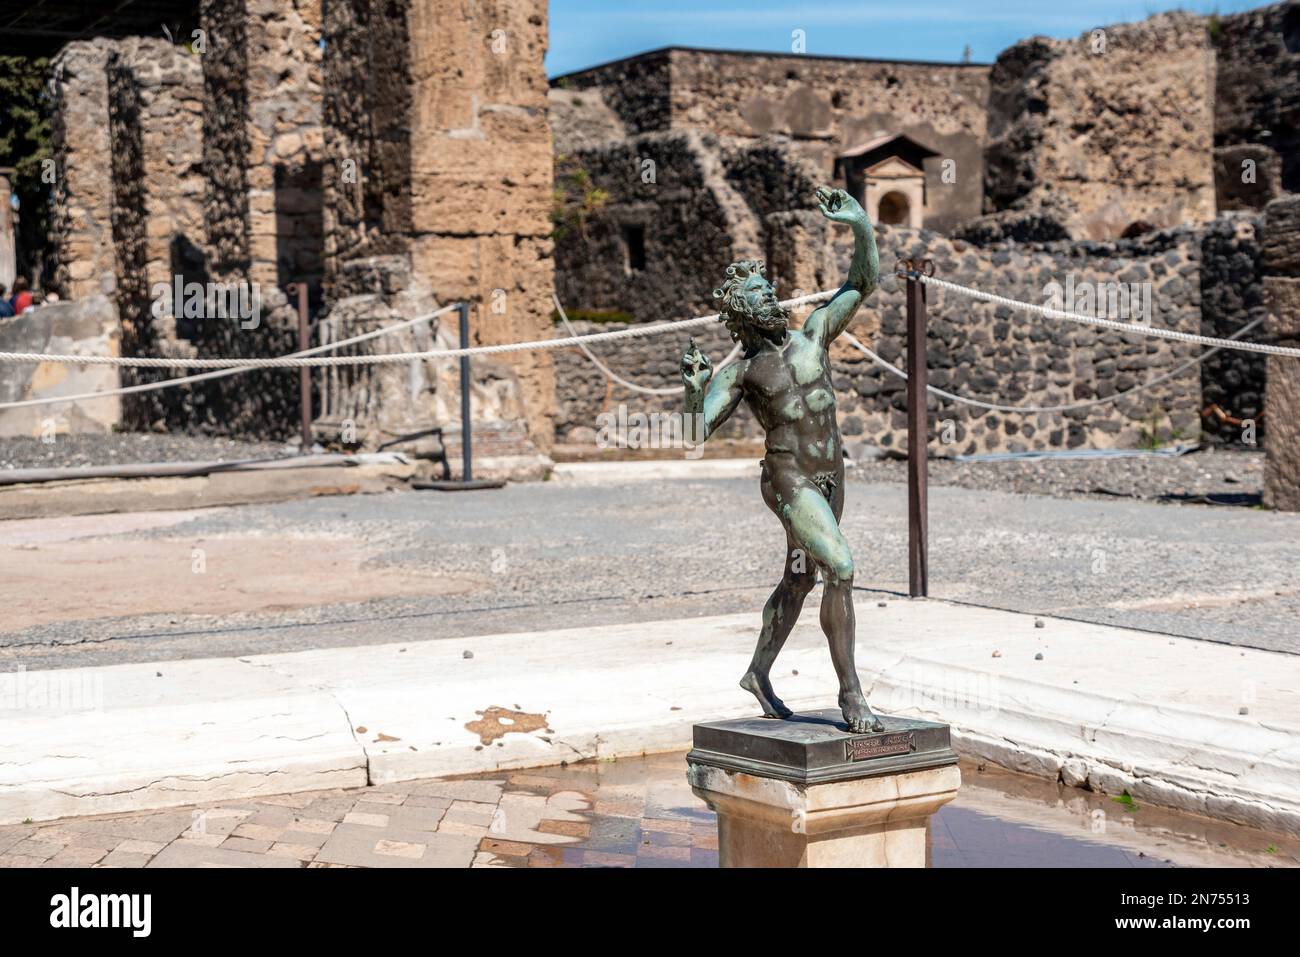 Pompeii, Italy, The famous dancing faun in the Pompeian house of the faun, Southern Italy Stock Photo